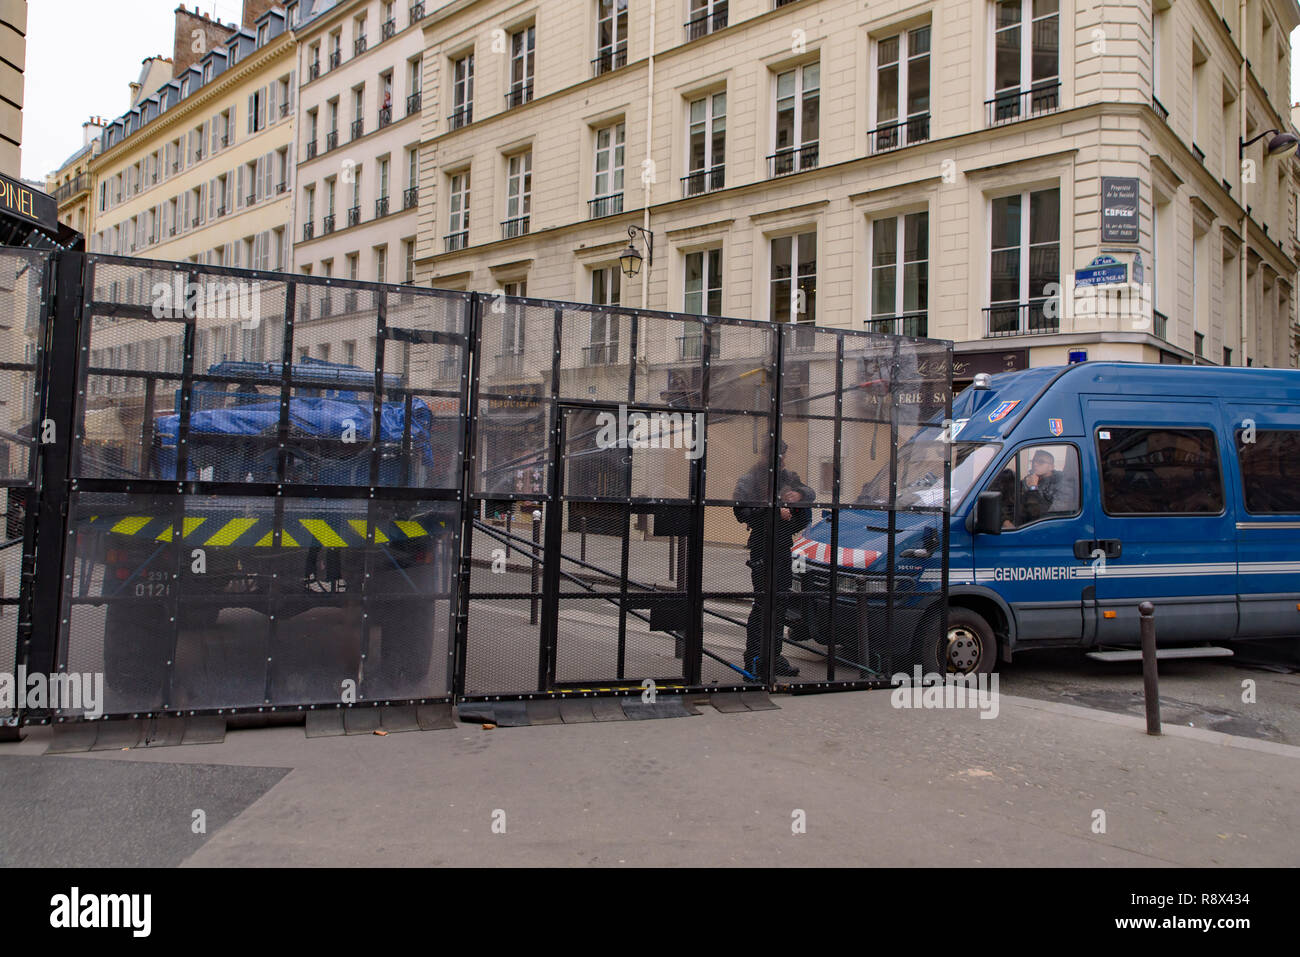 Police blocked the roads for Yellow Vests demonstration (Gilets Jaunes) protesters against government around Champs-Élysées, Paris, France Stock Photo